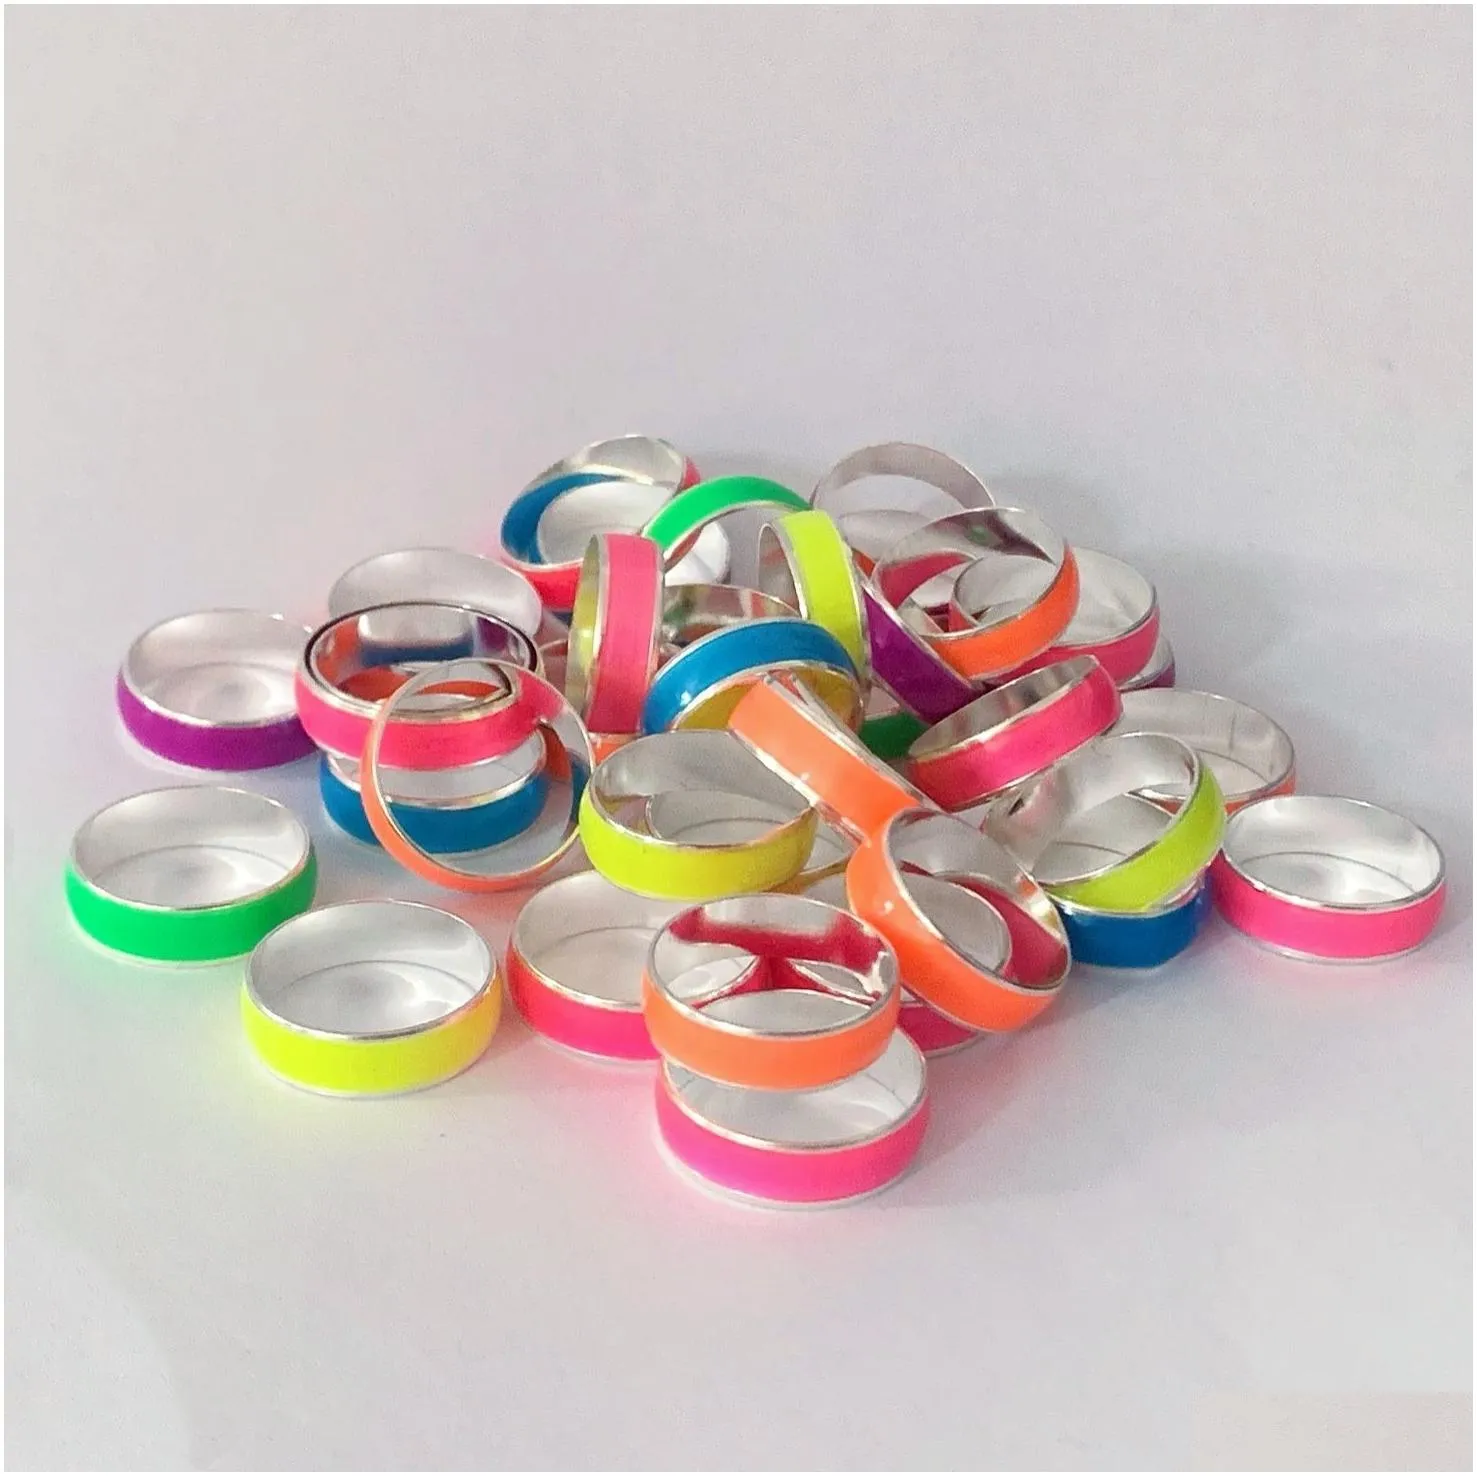 Band Rings Bk Lots 50Pcs Color Cute Luminous Band Rings Mix Women Men Party Gift Charm Jewelry Wholesale Jewelry Ring Dhioy